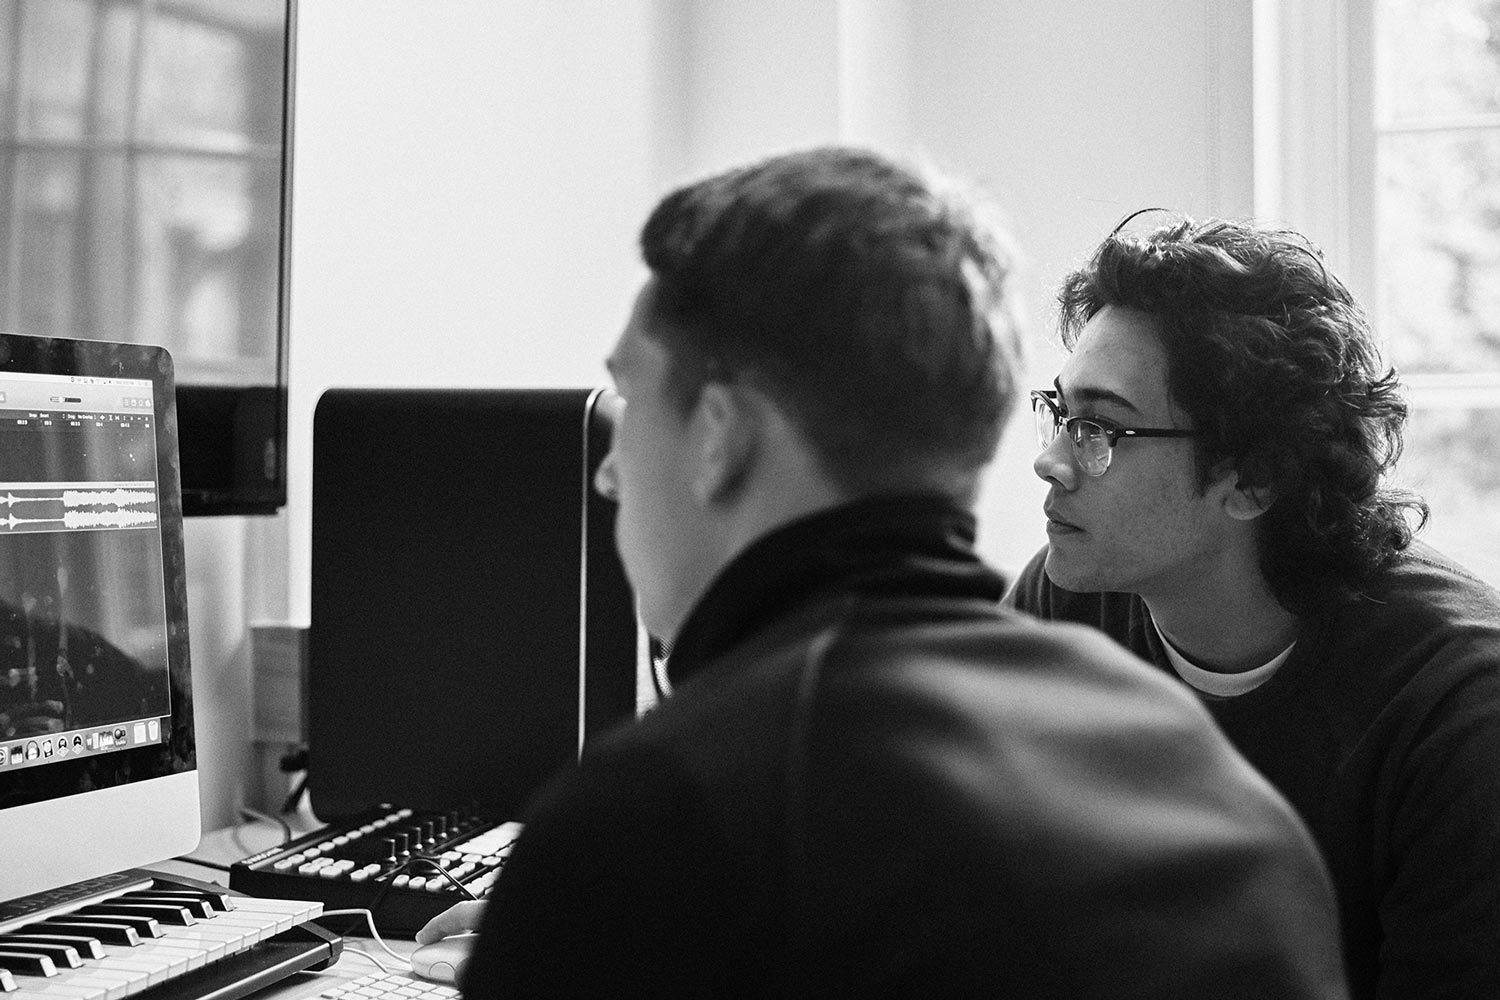 Two students working on a computer together, black and white image